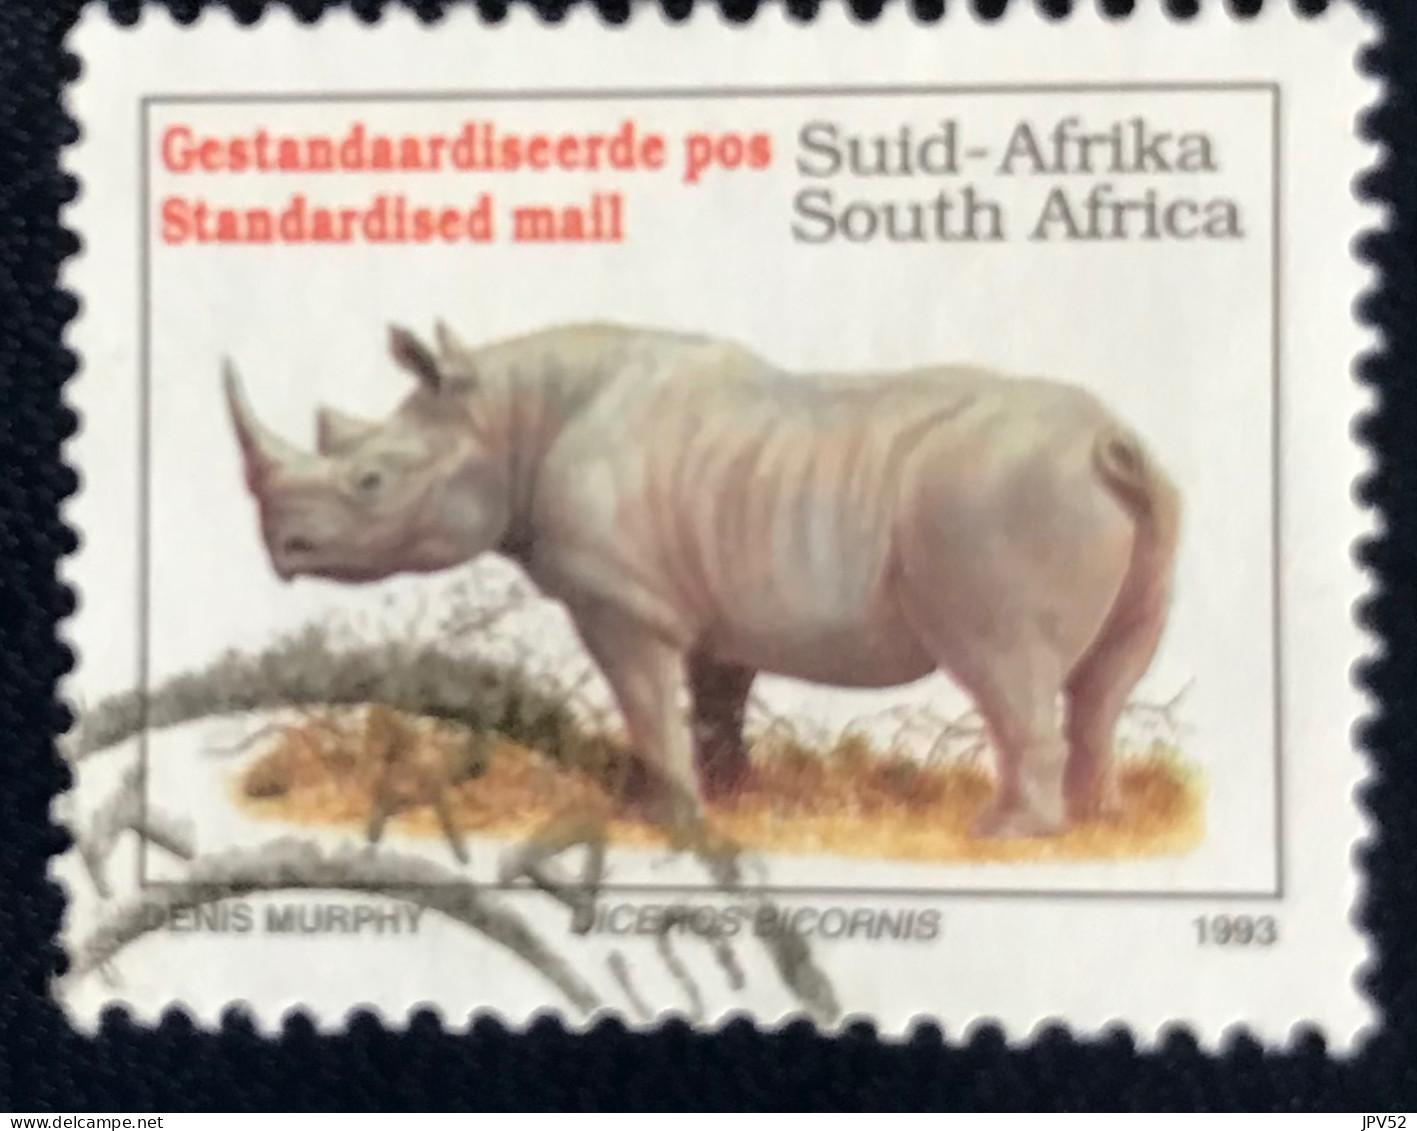 RSA - South Africa - Suid-Afrika  - C18/7 - 1996 - (°)used - Michel 896 - Bedreigde Dieren - Used Stamps